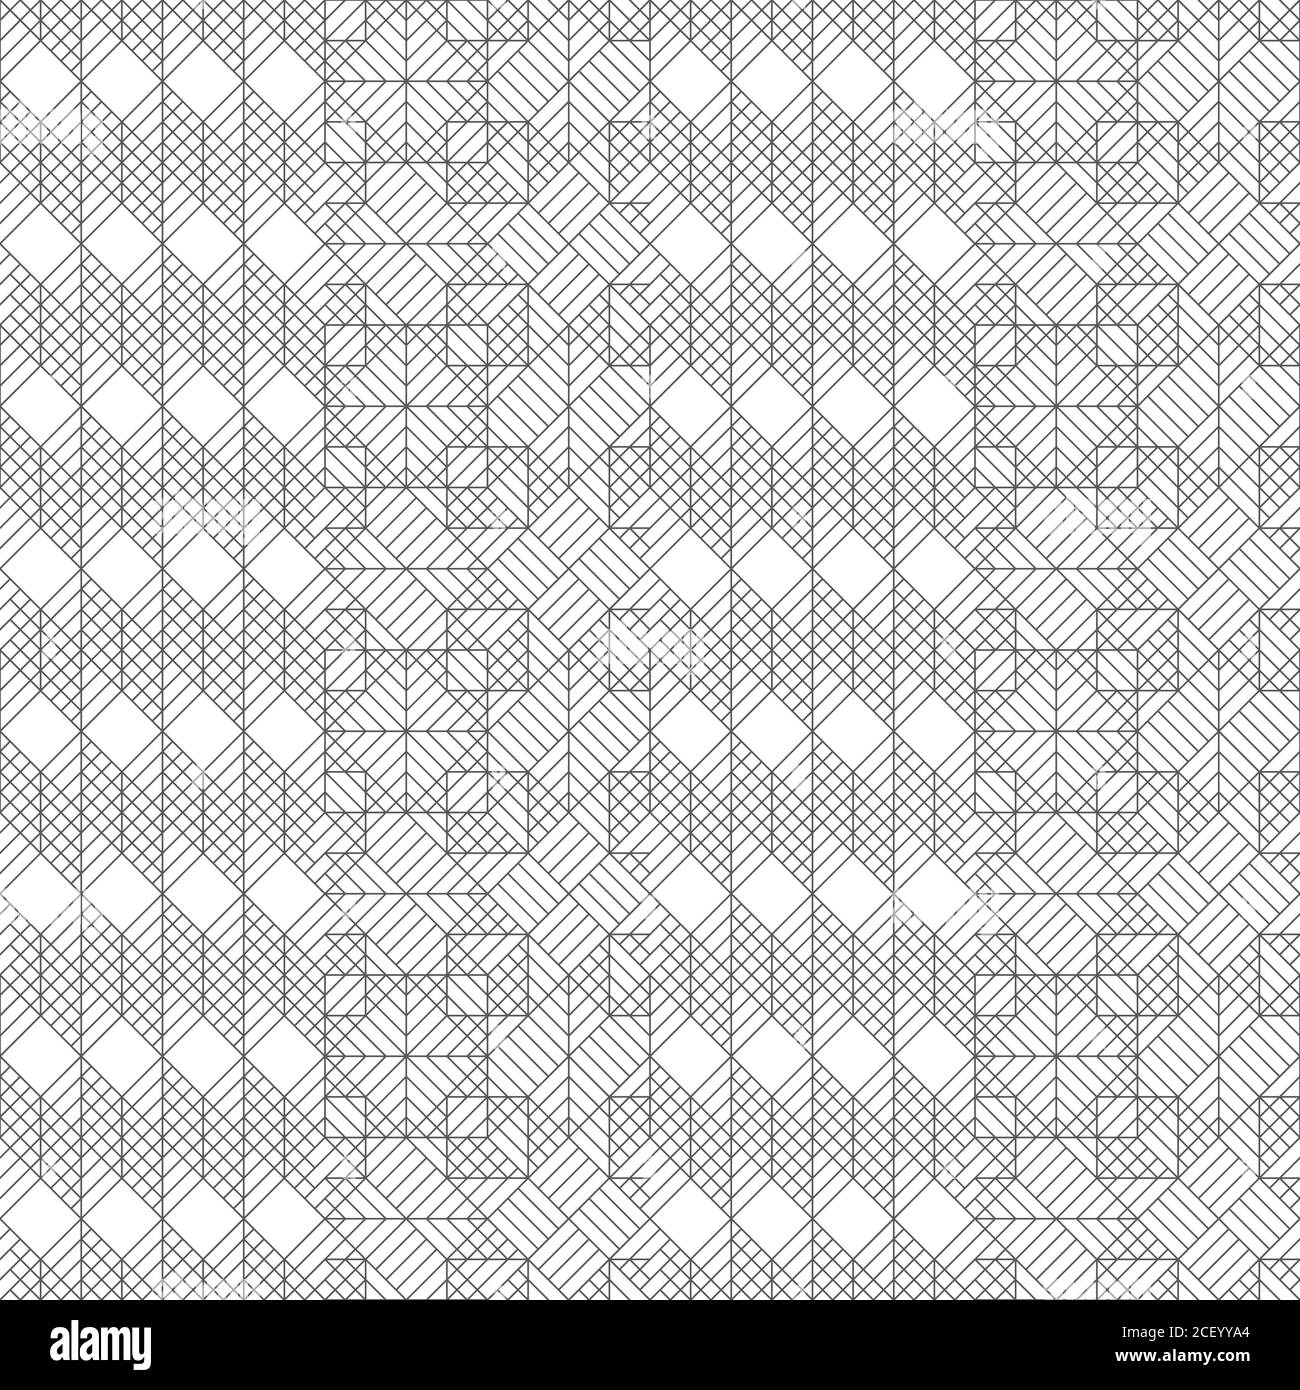 Vector seamless pattern. Modern stylish texture with thin lines which ...